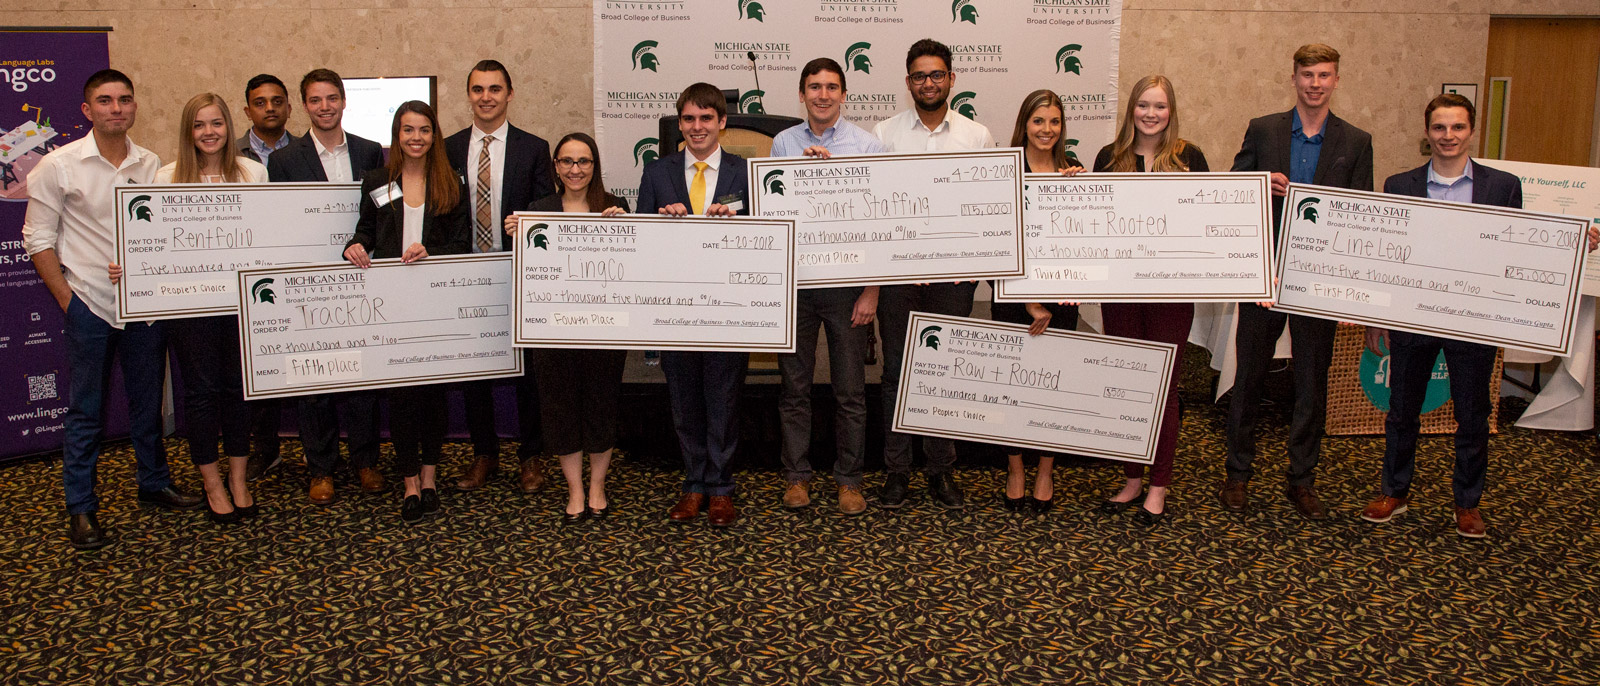 Business Model Competition winners standing with their oversized checks